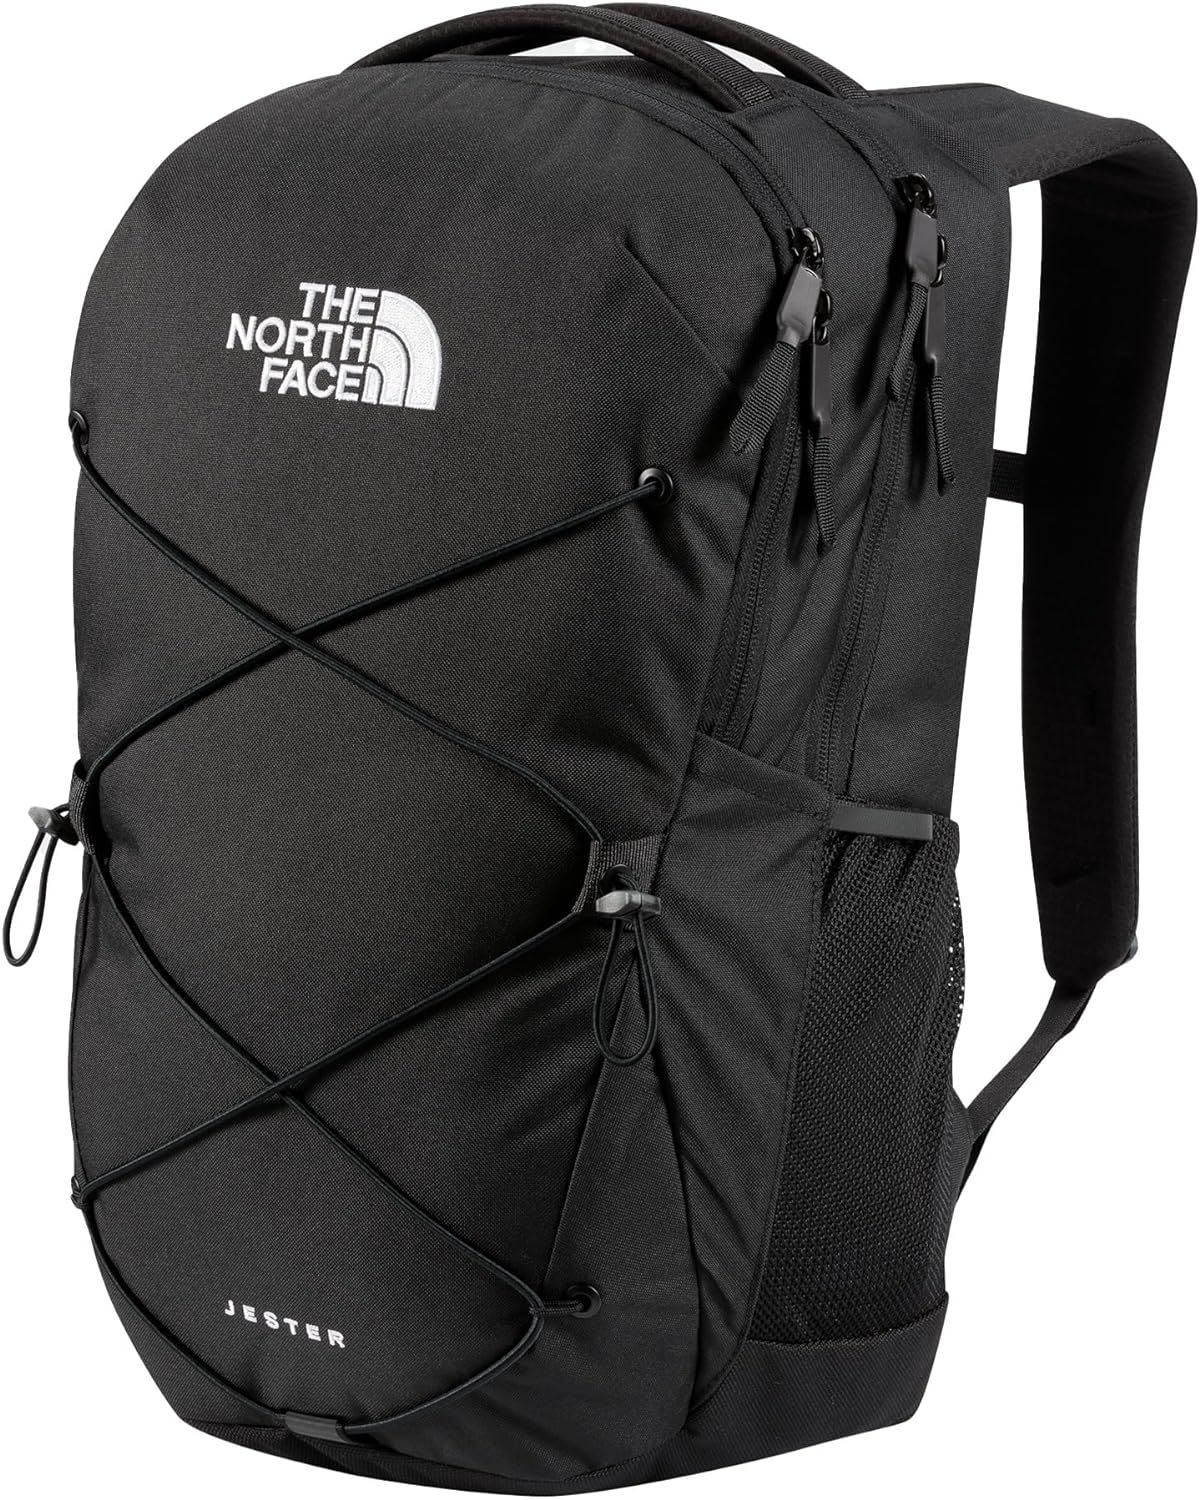 THE NORTH FACE Jester Commuter Laptop Backpack, TNF Black 2, One Size | Amazon (US)